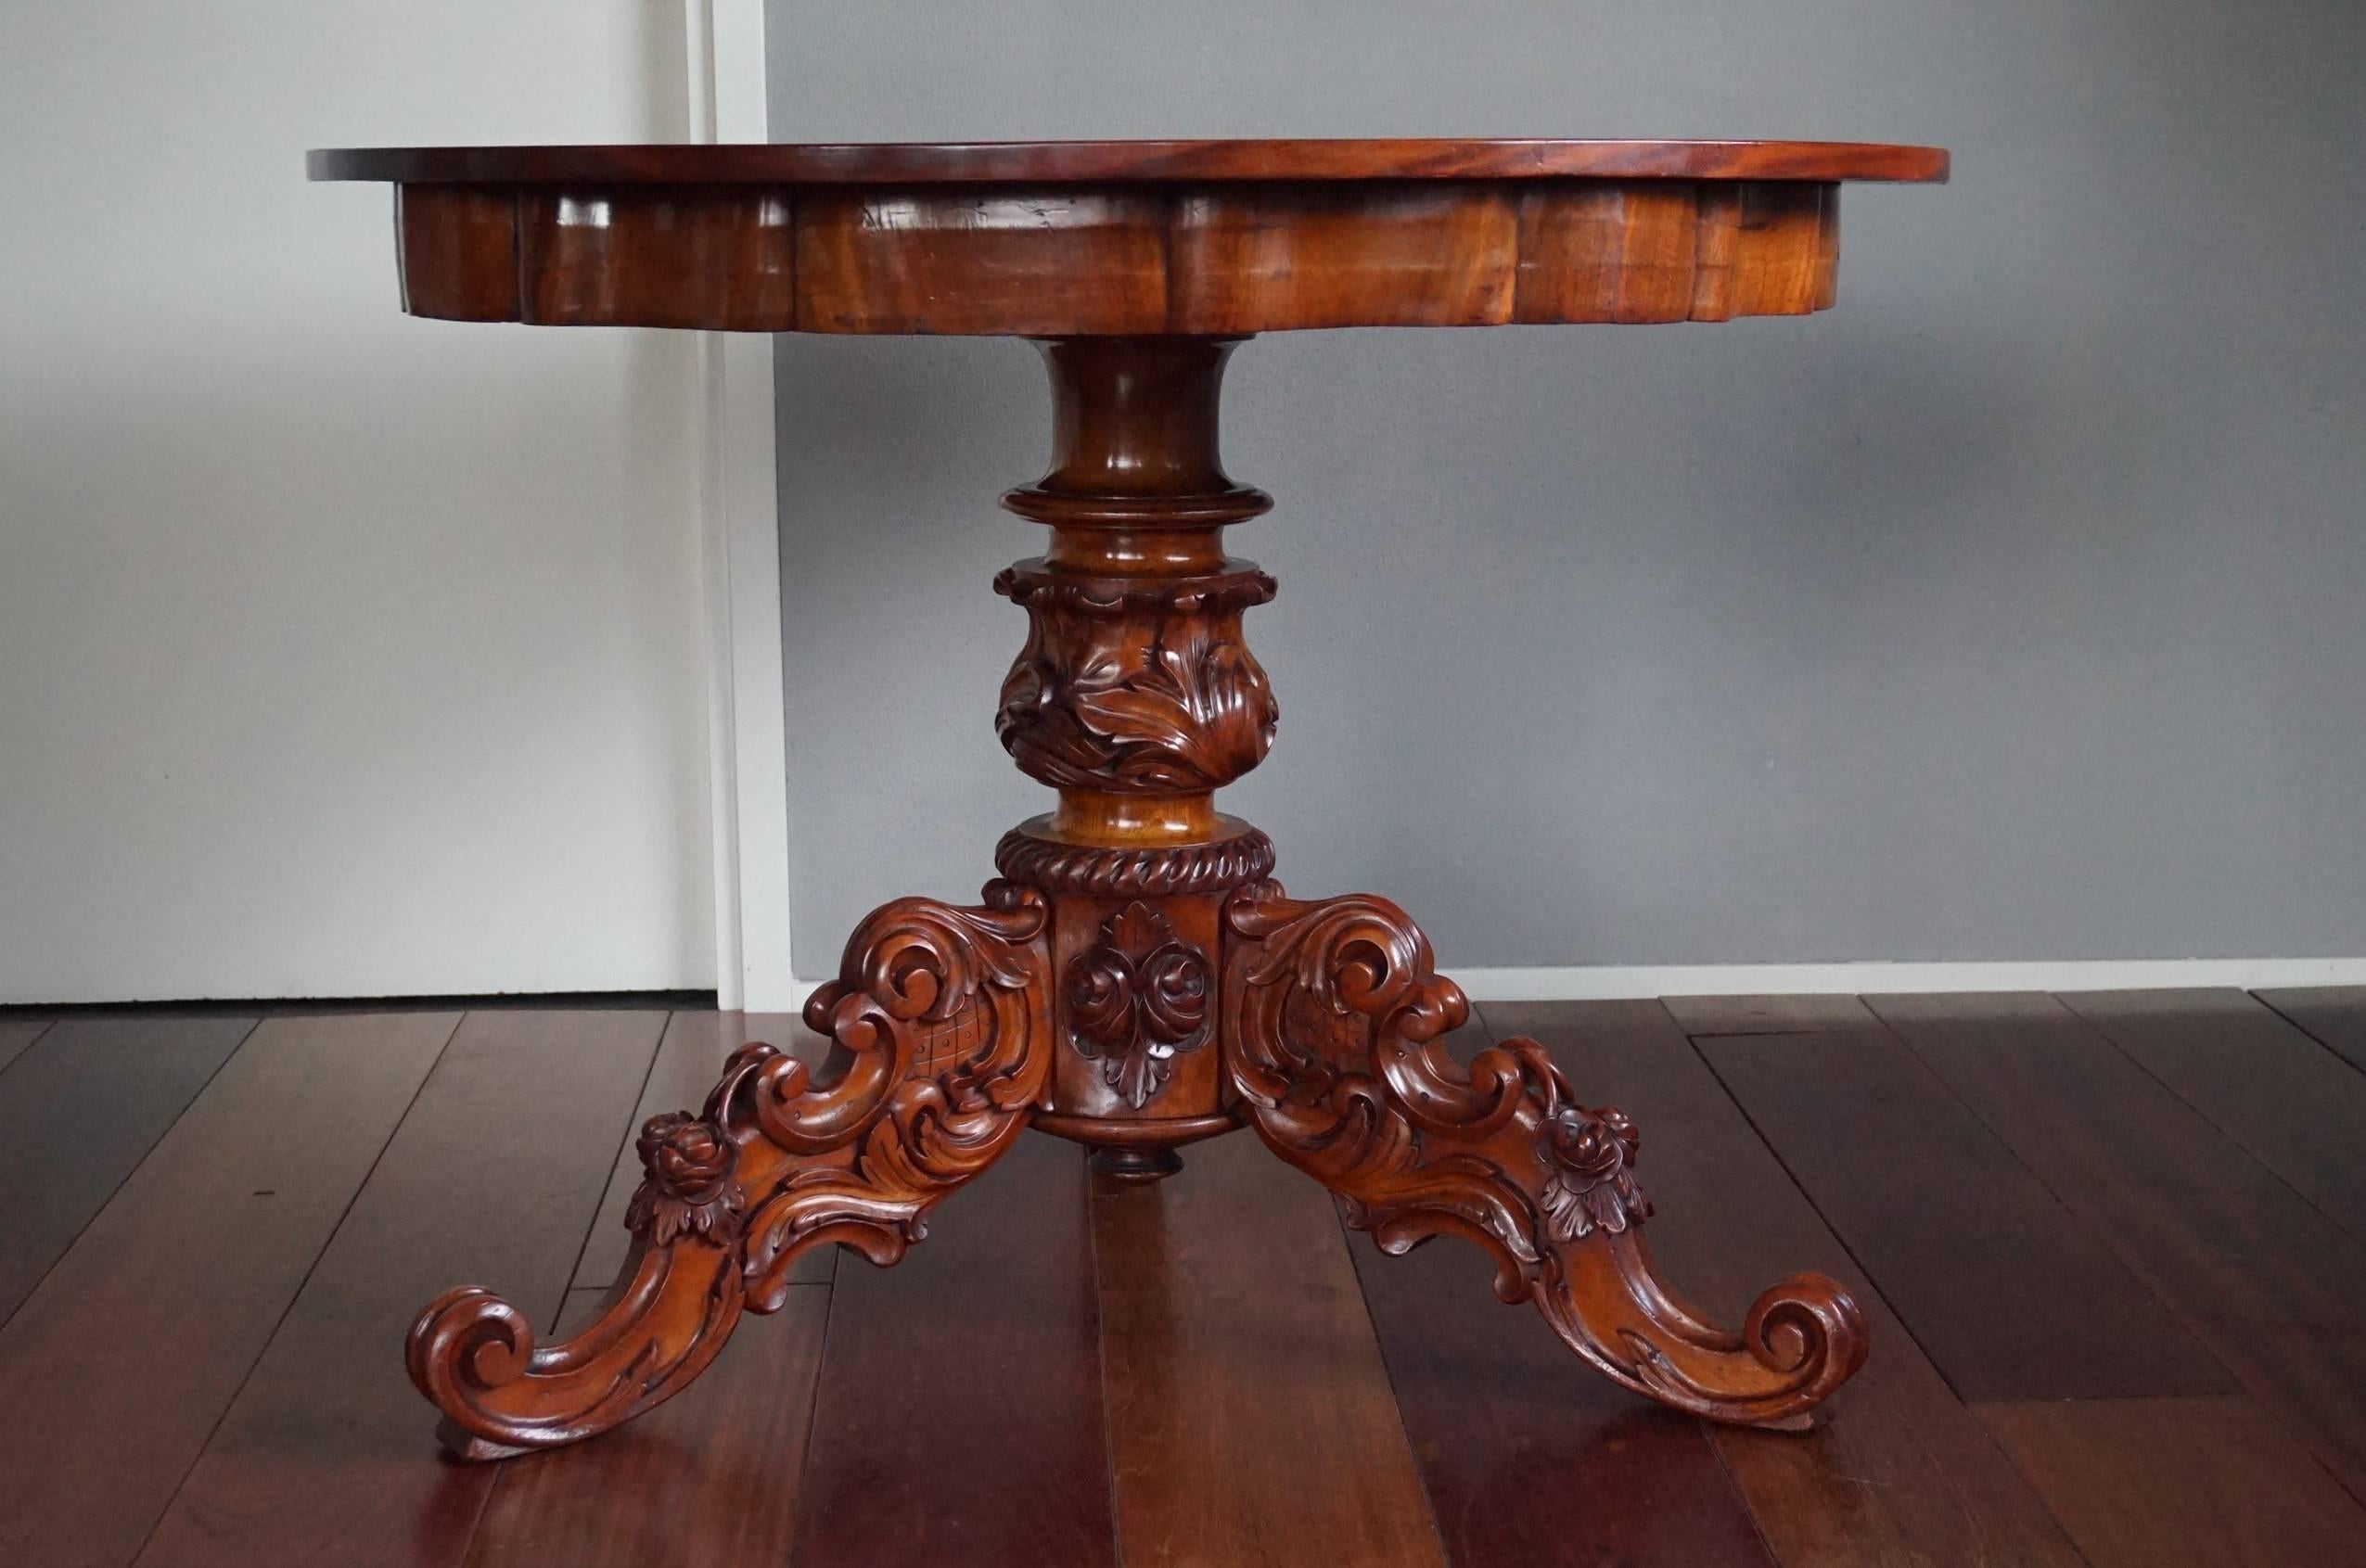 Impressive antique dining table.

This striking, mid 1800s two-piece dining or center table is of a beautiful shape and color. The hand-carved, solid wooden base with the wonderful, scrolling leafs is of the finest quality and condition. This